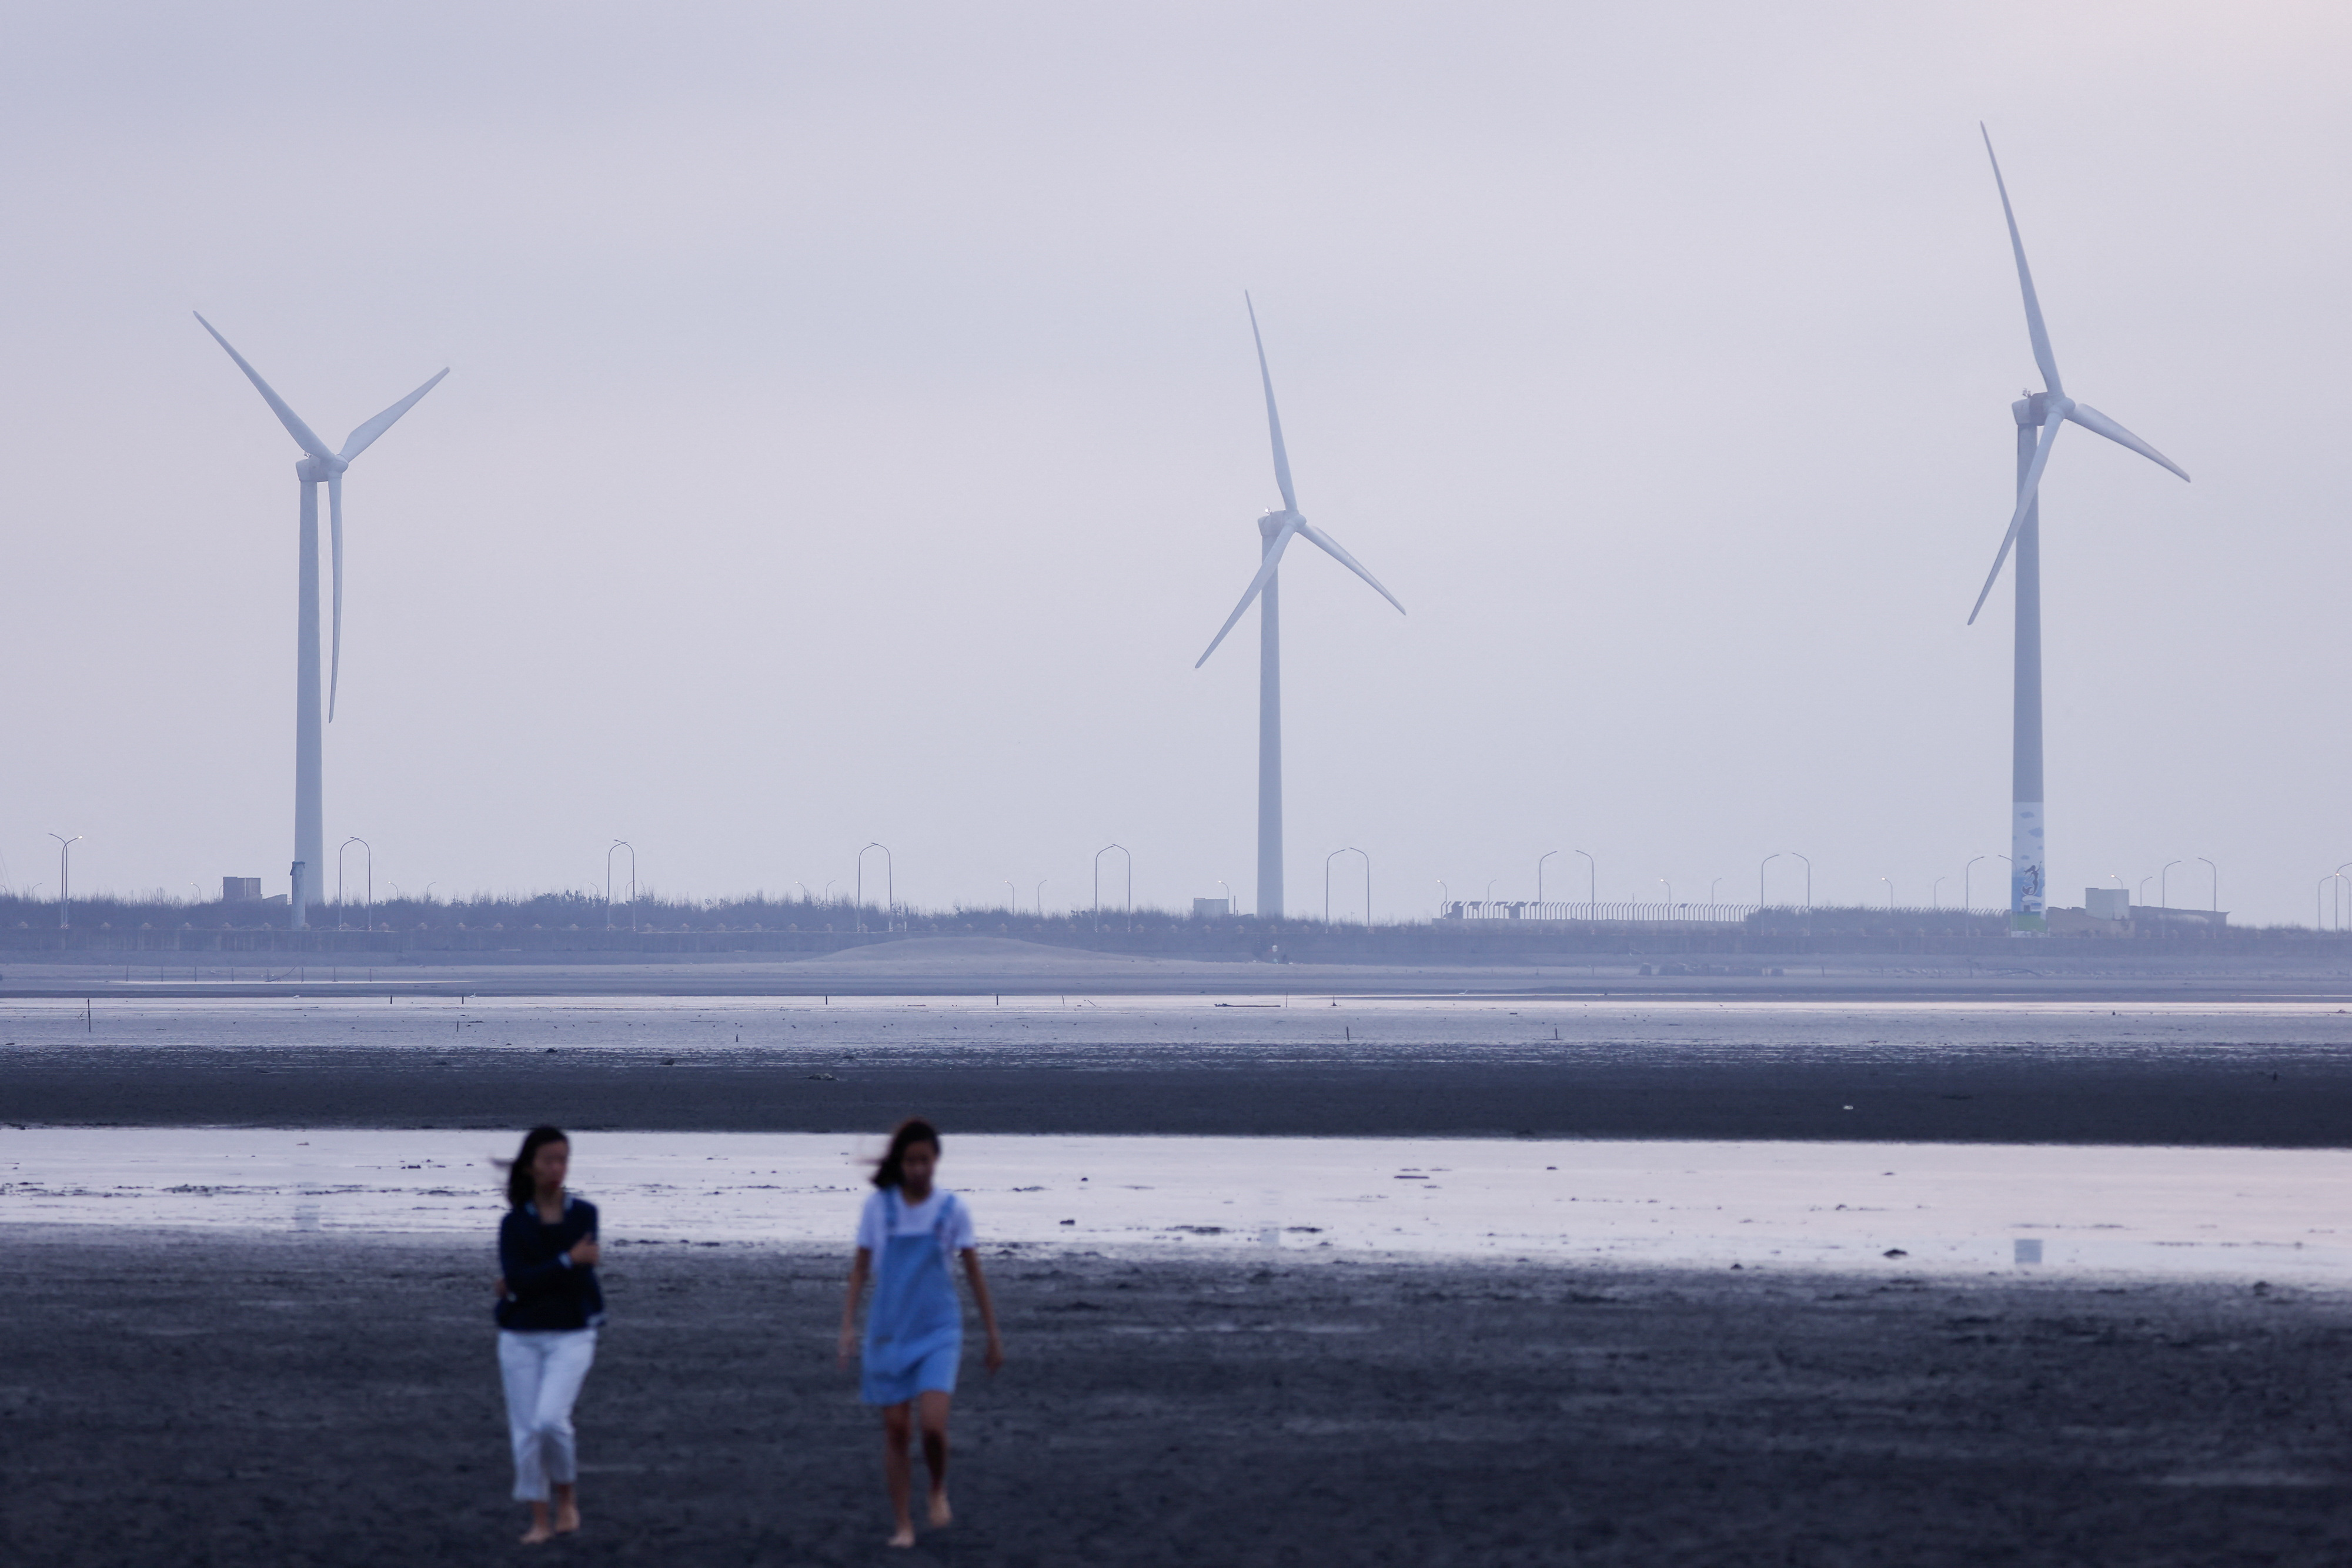 Tourists walk on the sand in front of wind turbines at Gaomei Wetlands in Taichung, in Taichung